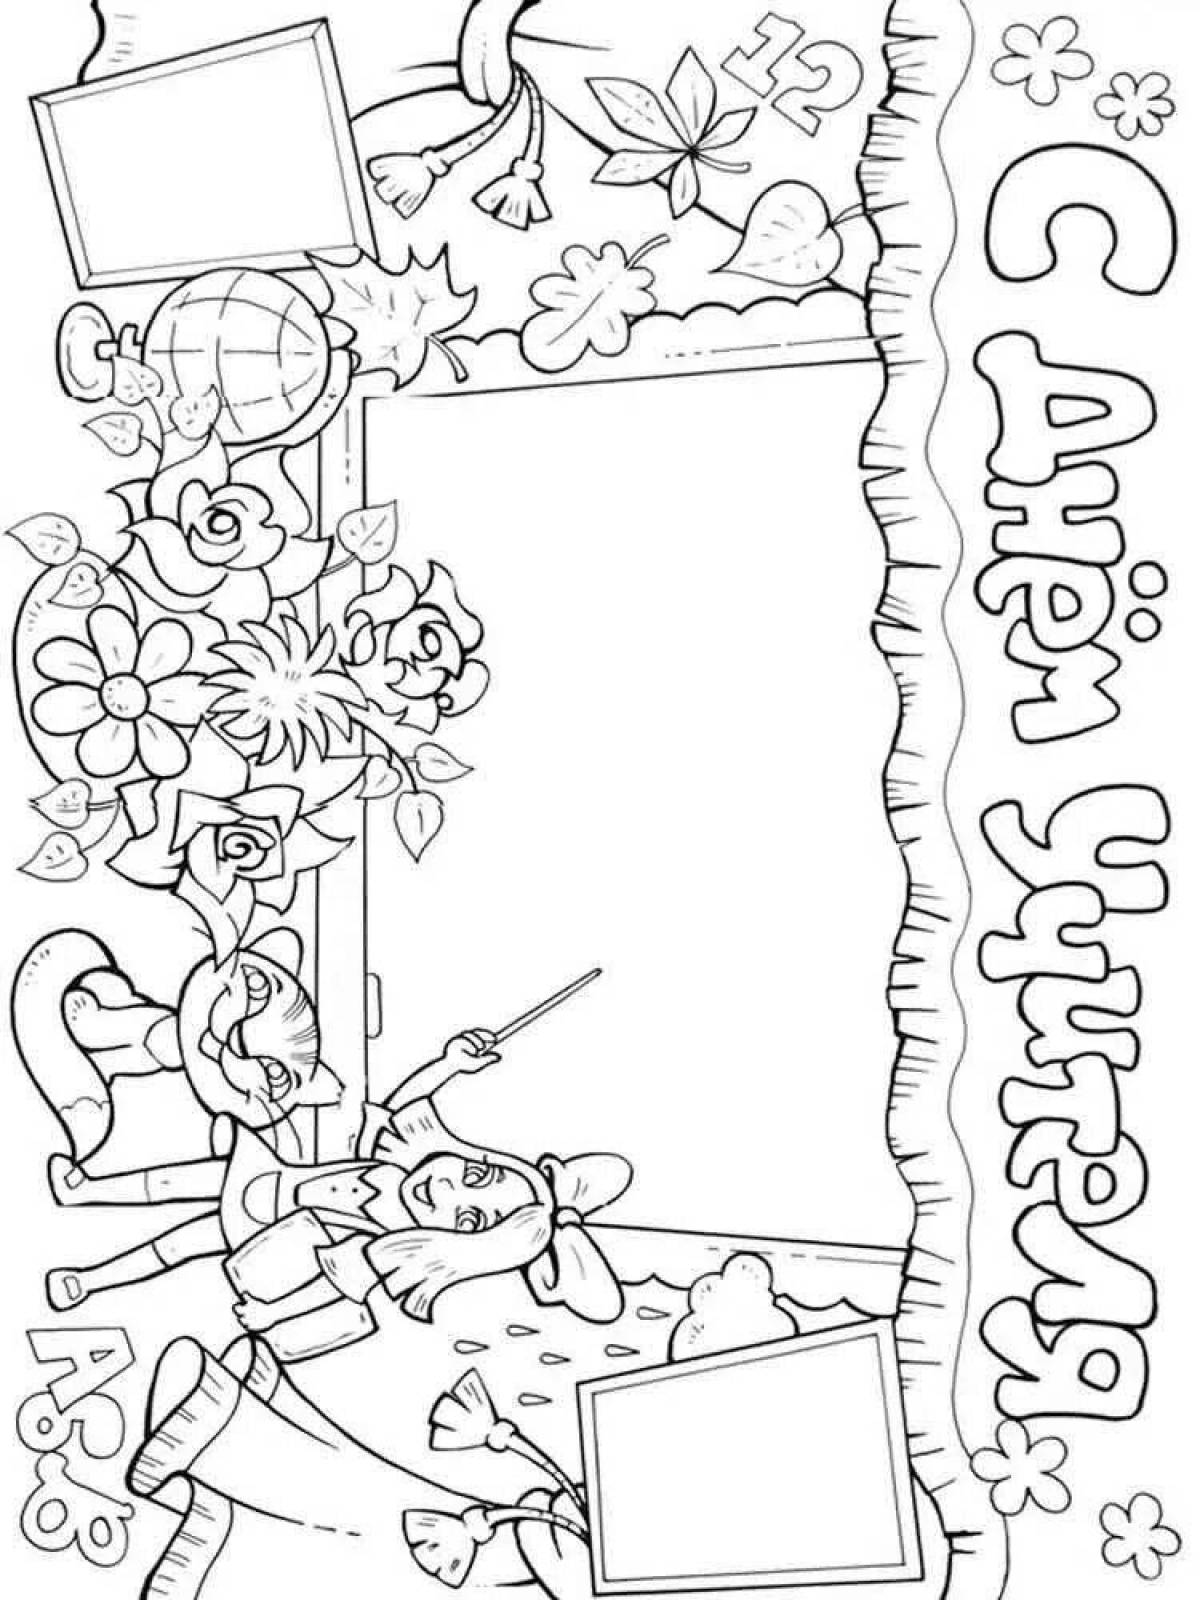 Color-lively happy birthday school coloring page